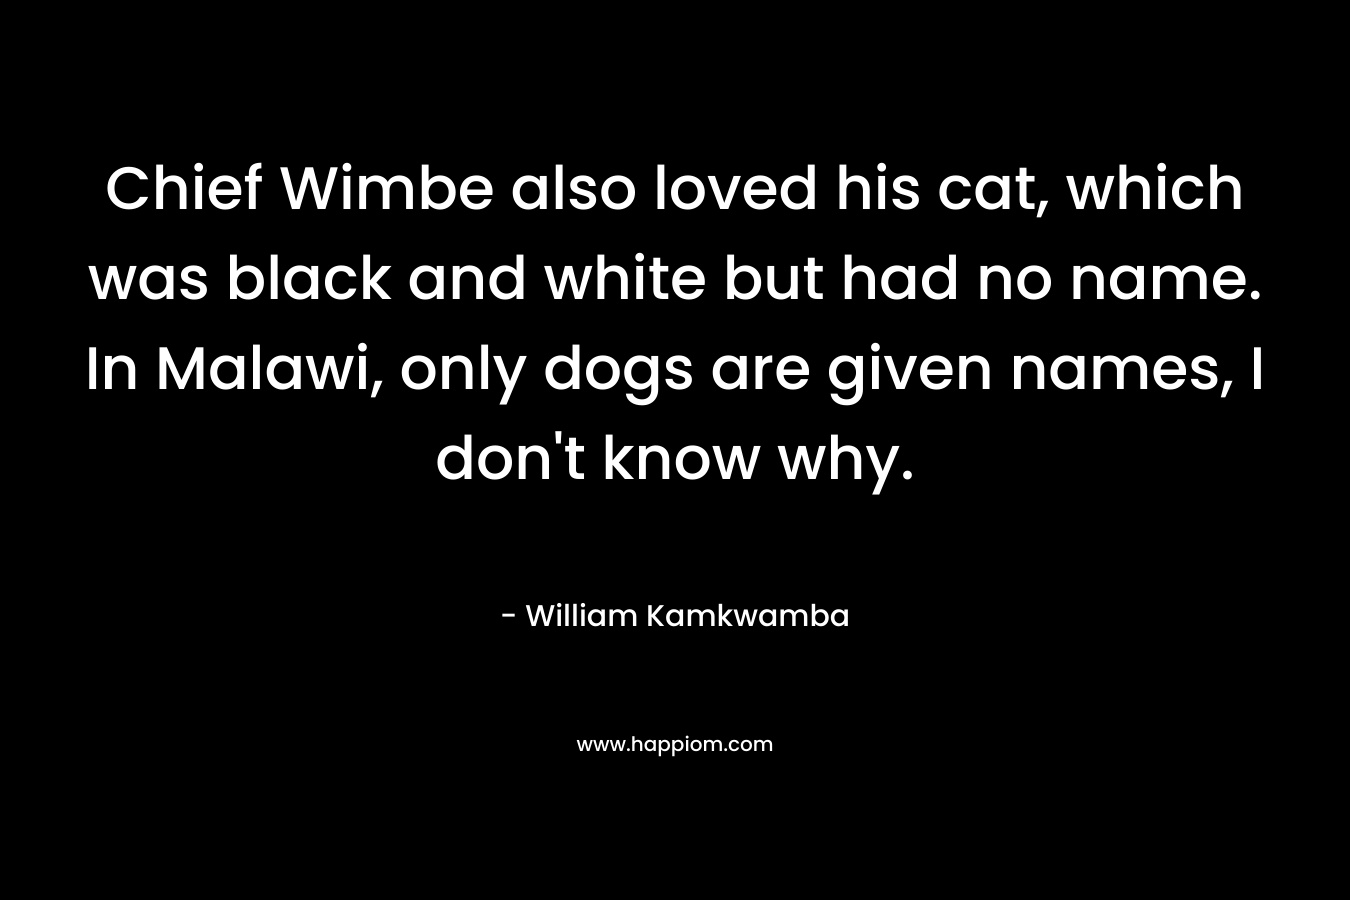 Chief Wimbe also loved his cat, which was black and white but had no name. In Malawi, only dogs are given names, I don’t know why. – William Kamkwamba